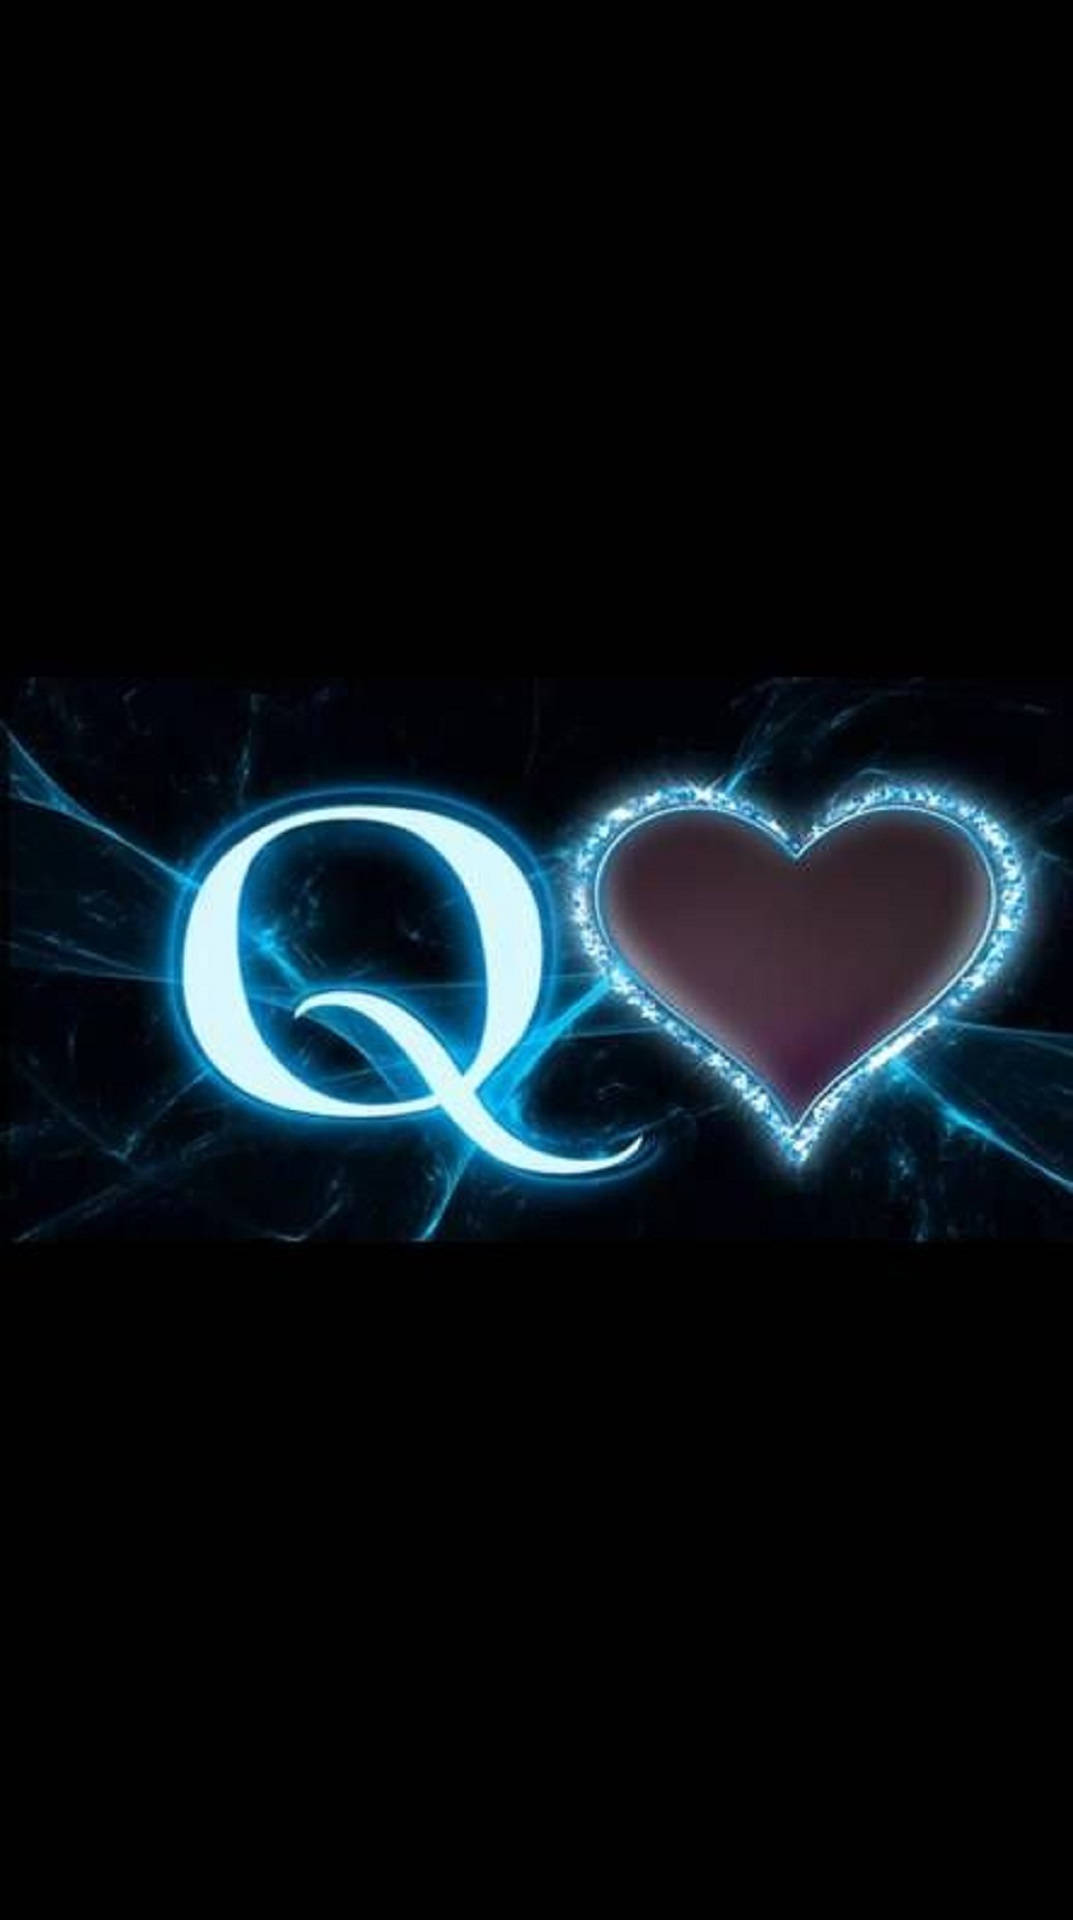 Letter Q With Blue Heart Background